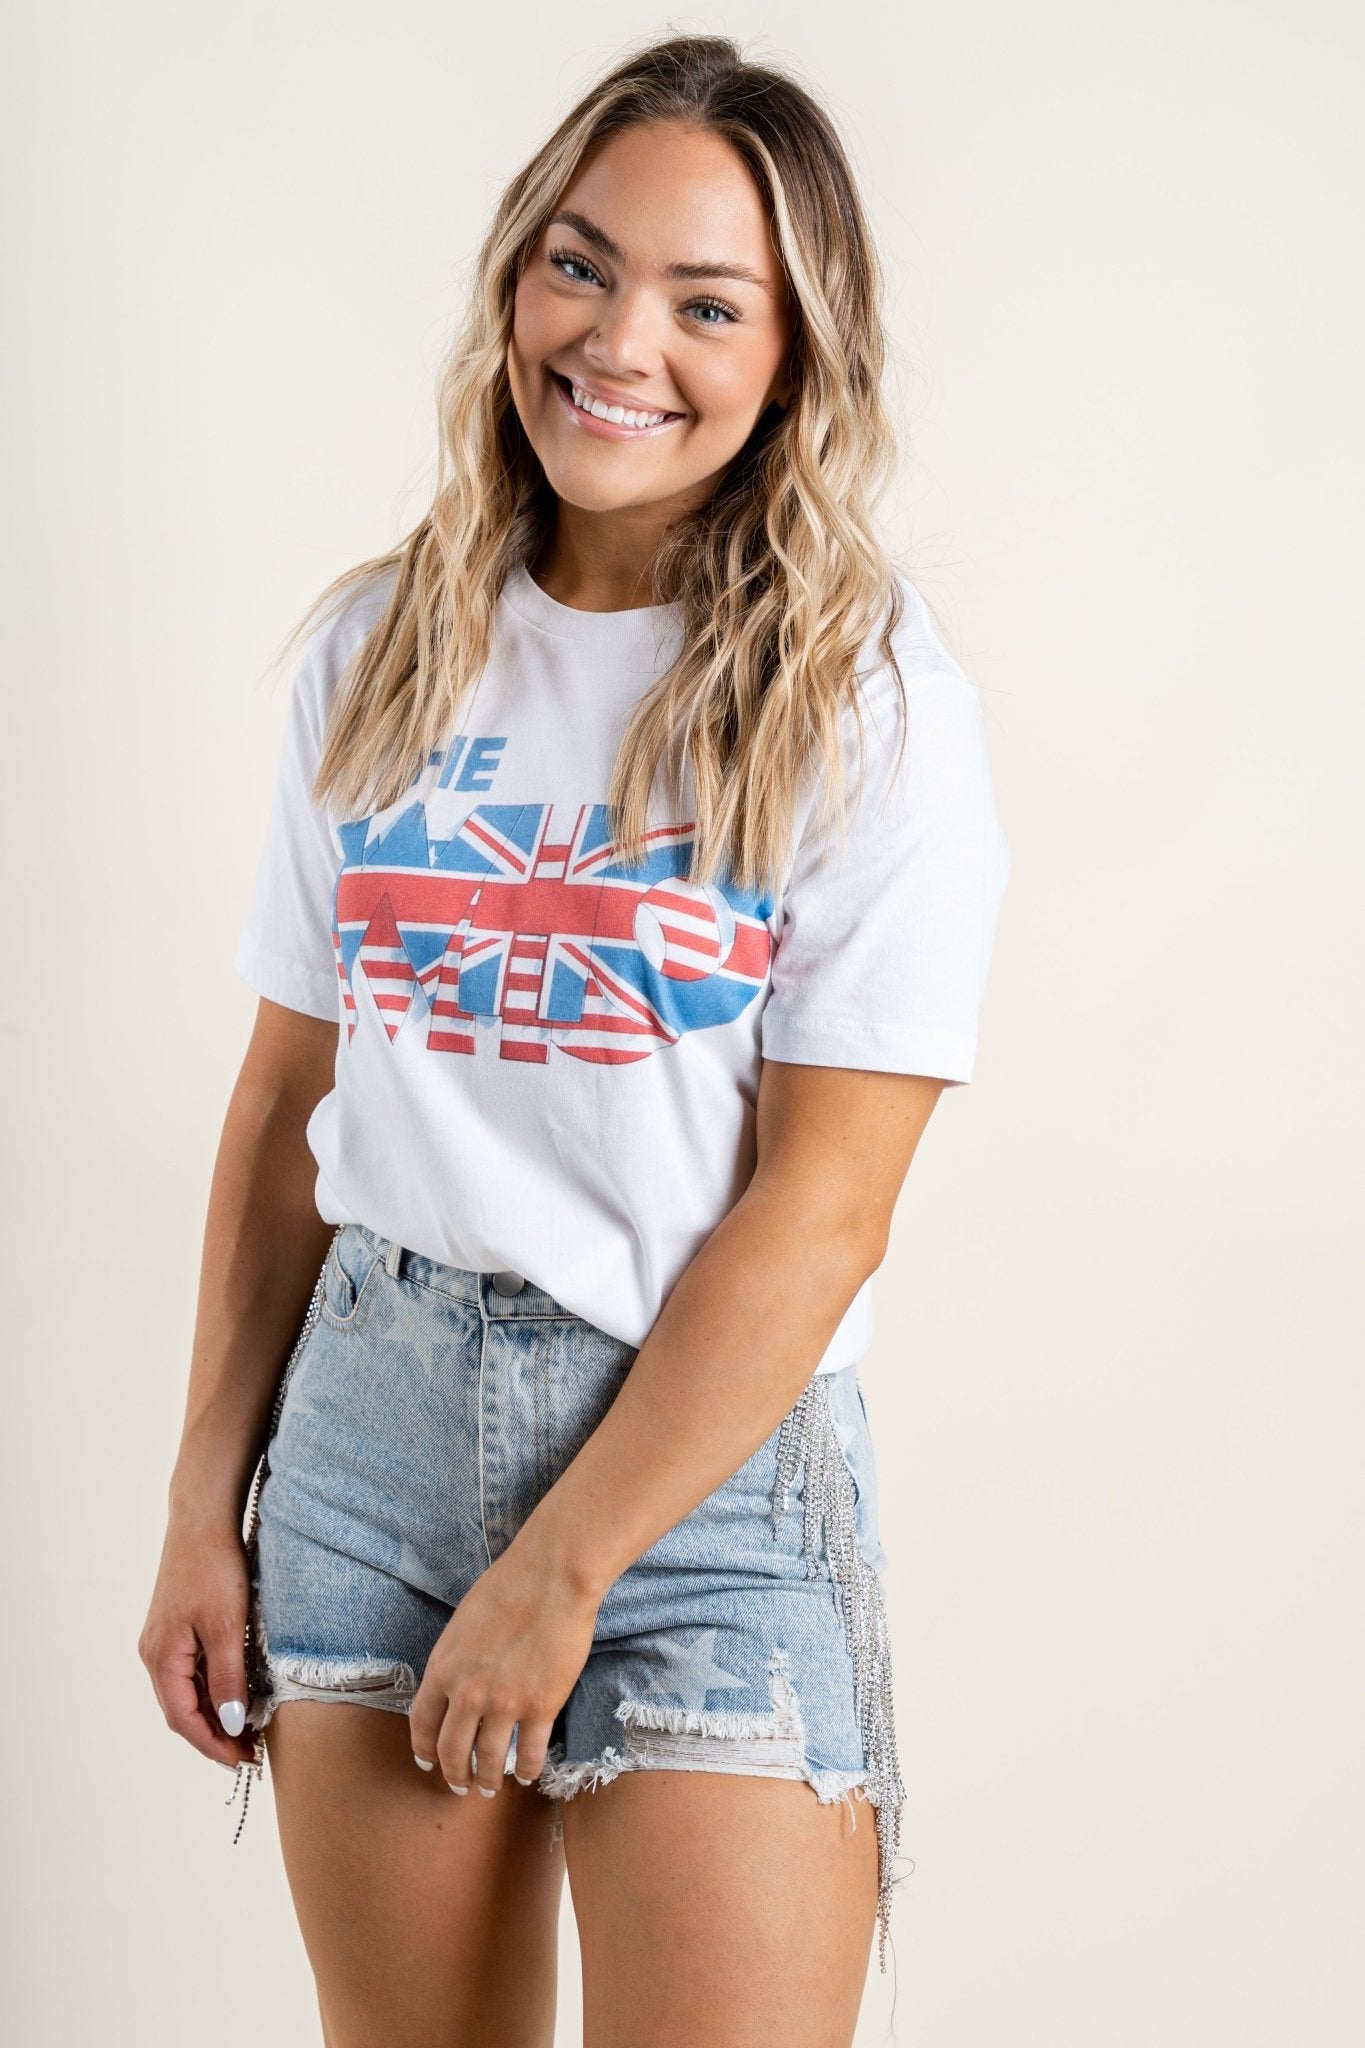 The Who double flag t-shirt white - Affordable T-shirts - Boutique Graphic T-Shirts at Lush Fashion Lounge Boutique in Oklahoma City